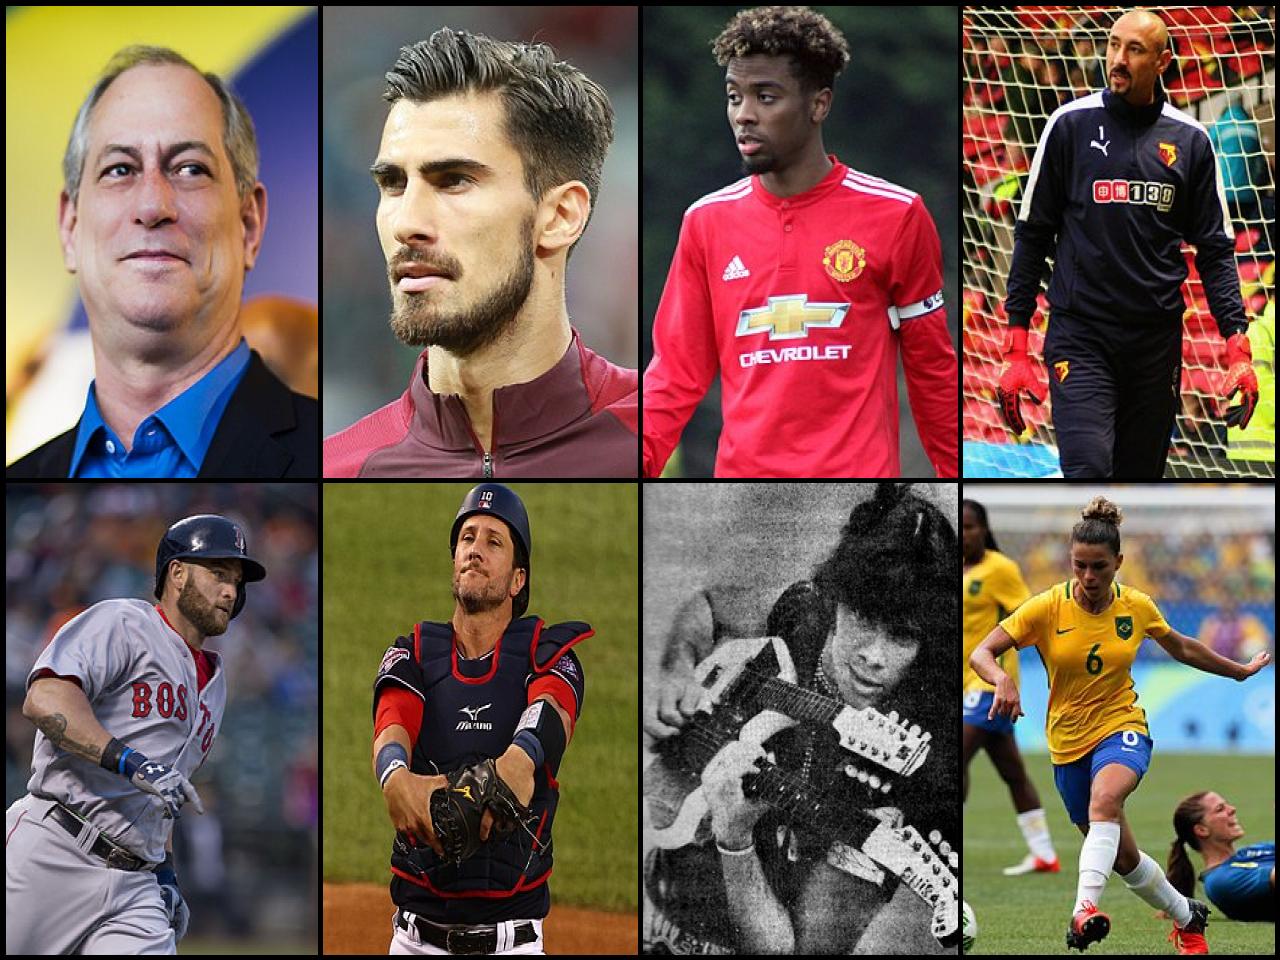 Famous People with surname Gomes